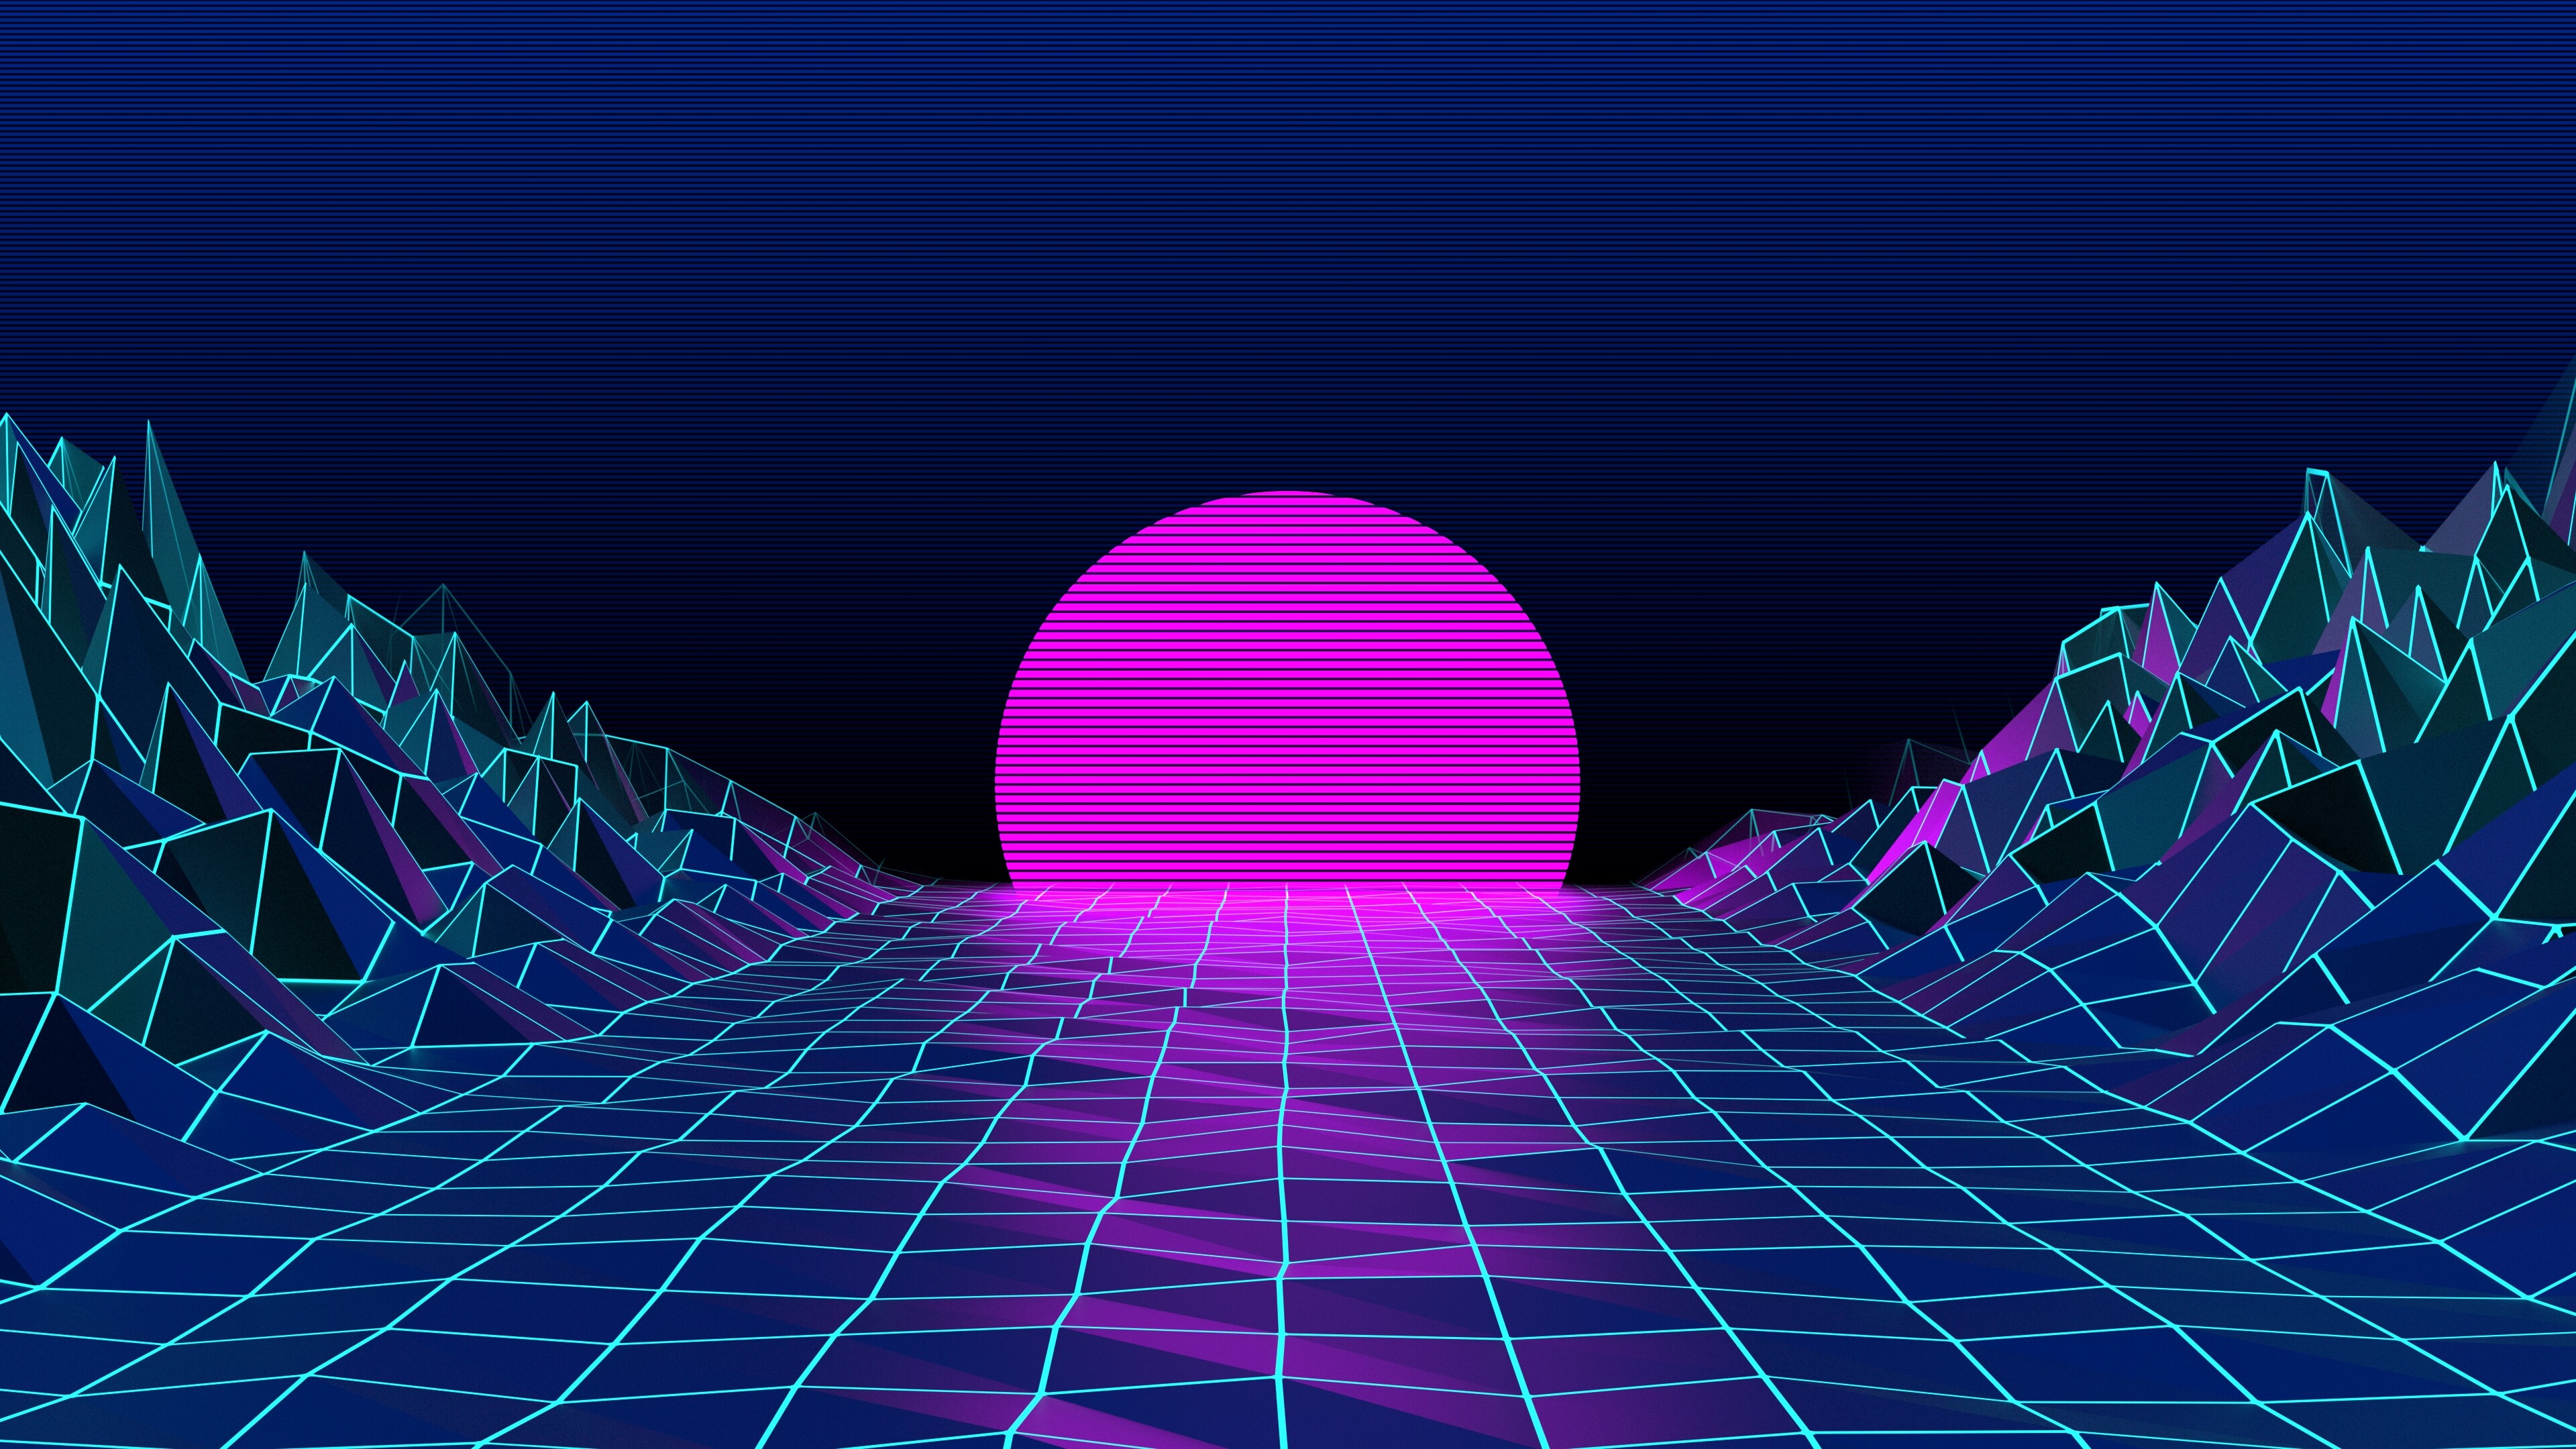 Geometry: Polyhedrons, Three-dimensional space, Neon grid, Parallel lines. 3840x2160 4K Background.